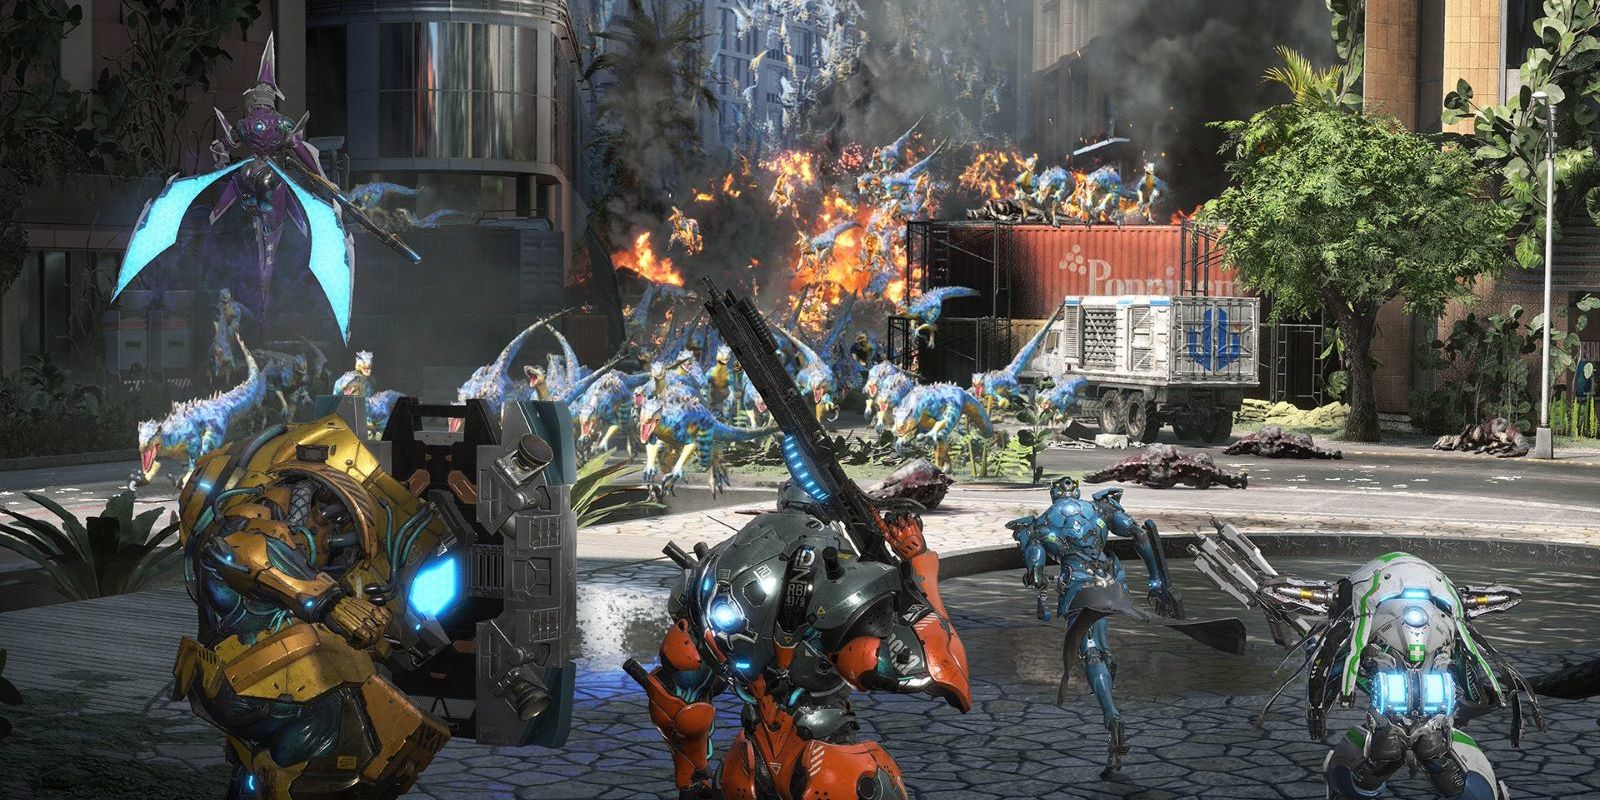 A team of exosuits are seen preparing to collide with a large wave of Exoprimal's raptors who are rushing towards the player through a city street, covered in fire and rubble.